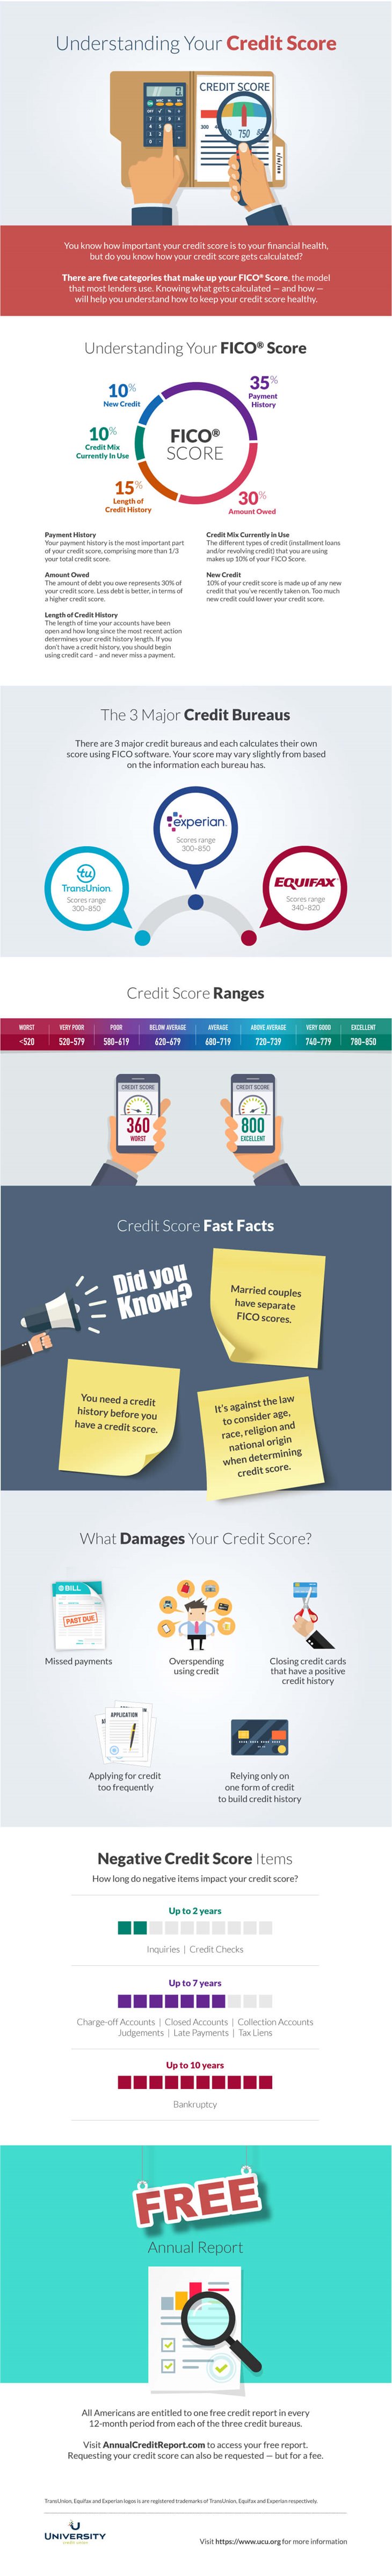 Understanding Your Credit Score. You know how important your credit score is to your financial health, but do you know how your credit score gets calculated? There are five categories that make up your FICO® Score, the model that most lenders use. Knowing what gets calculated — and how — will help you understand how to keep your credit score healthy. Understanding Your FICO® Score. Payment History. Your payment history is the most important part of your credit score, comprising more than 1/3 your total credit score. Amount Owed. The amount of debt you owe represents 30% of your credit score. Less debt is better, in terms of a higher credit score. Length of Credit History. The length of time your accounts have been open and how long since the most recent action
determines your credit history length. If you don’t have a credit history, you should begin using credit card – and never miss a payment. Credit Mix Currently in Use. The different types of credit (installment loans and/or revolving credit) that you are using makes up 10% of your FICO Score. New Credit. 10% of your credit score is made up of any new credit that you’ve recently taken on. Too much new credit could lower your credit score. The 3 Major Credit Bureaus. There are 3 major credit bureaus and each calculates their own score using FICO software. Your score may vary slightly from based on the information each bureau has. Credit Score Ranges from below 520 (worst) to 780-850 (Excellent). Credit Score Fast Facts. Married couples have separate FICO scores. You need a credit
history before you have a credit score. It’s against the law to consider age, race, religion and
national origin when determining credit score. What Damages Your Credit Score? Missed payments, Overspending using credit, Closing credit cards that have a positive credit history, Applying for credit too frequently, Relying only on one form of credit to build credit history. Negative Credit Score Items. How long do negative items impact your credit score? Inquires and credit checks effect your credit, up to 2 years. Charge-off Accounts, Closed Accounts, collection Accounts, Judgements, late Payments, tax Liens; up to 7 years. Bankruptcy up to 10 years. All Americans are entitled to one free credit report in every 12-month period from each of the three credit bureaus. Visit AnnualCreditReport.com to access your free report. Requesting your credit score can also be requested — but for a fee. TransUnion, Equifax and Experian logos is are registered trademarks of TransUnion, Equifax and Experian respectively. 